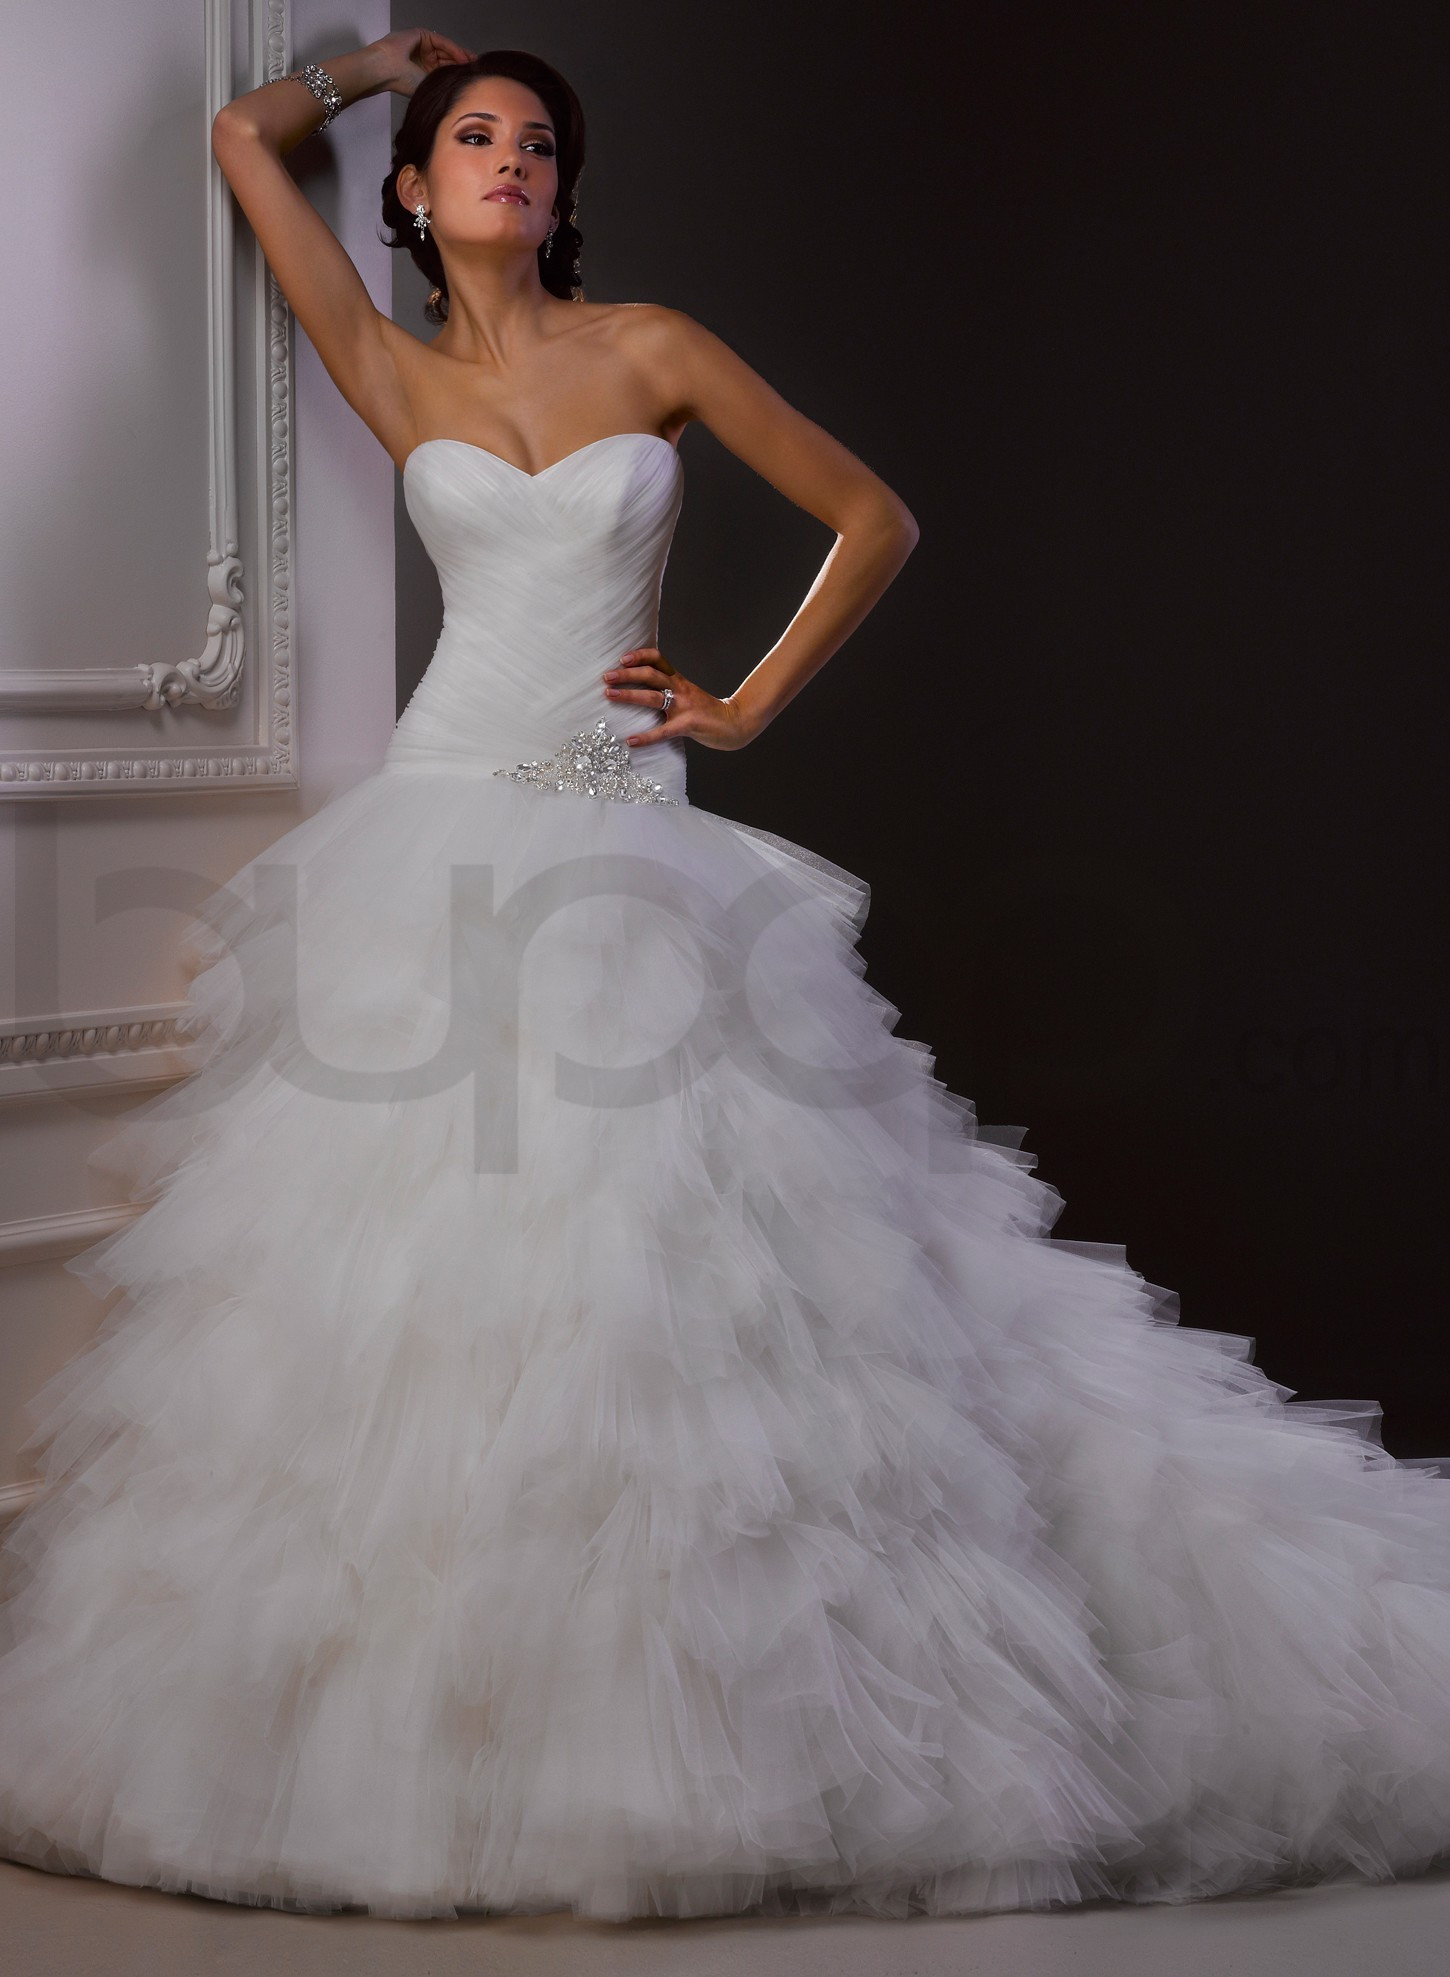 Sweetheart Wedding Gown
 Elegant Ball Gown Wedding Dresses with Sweetheart Neckline